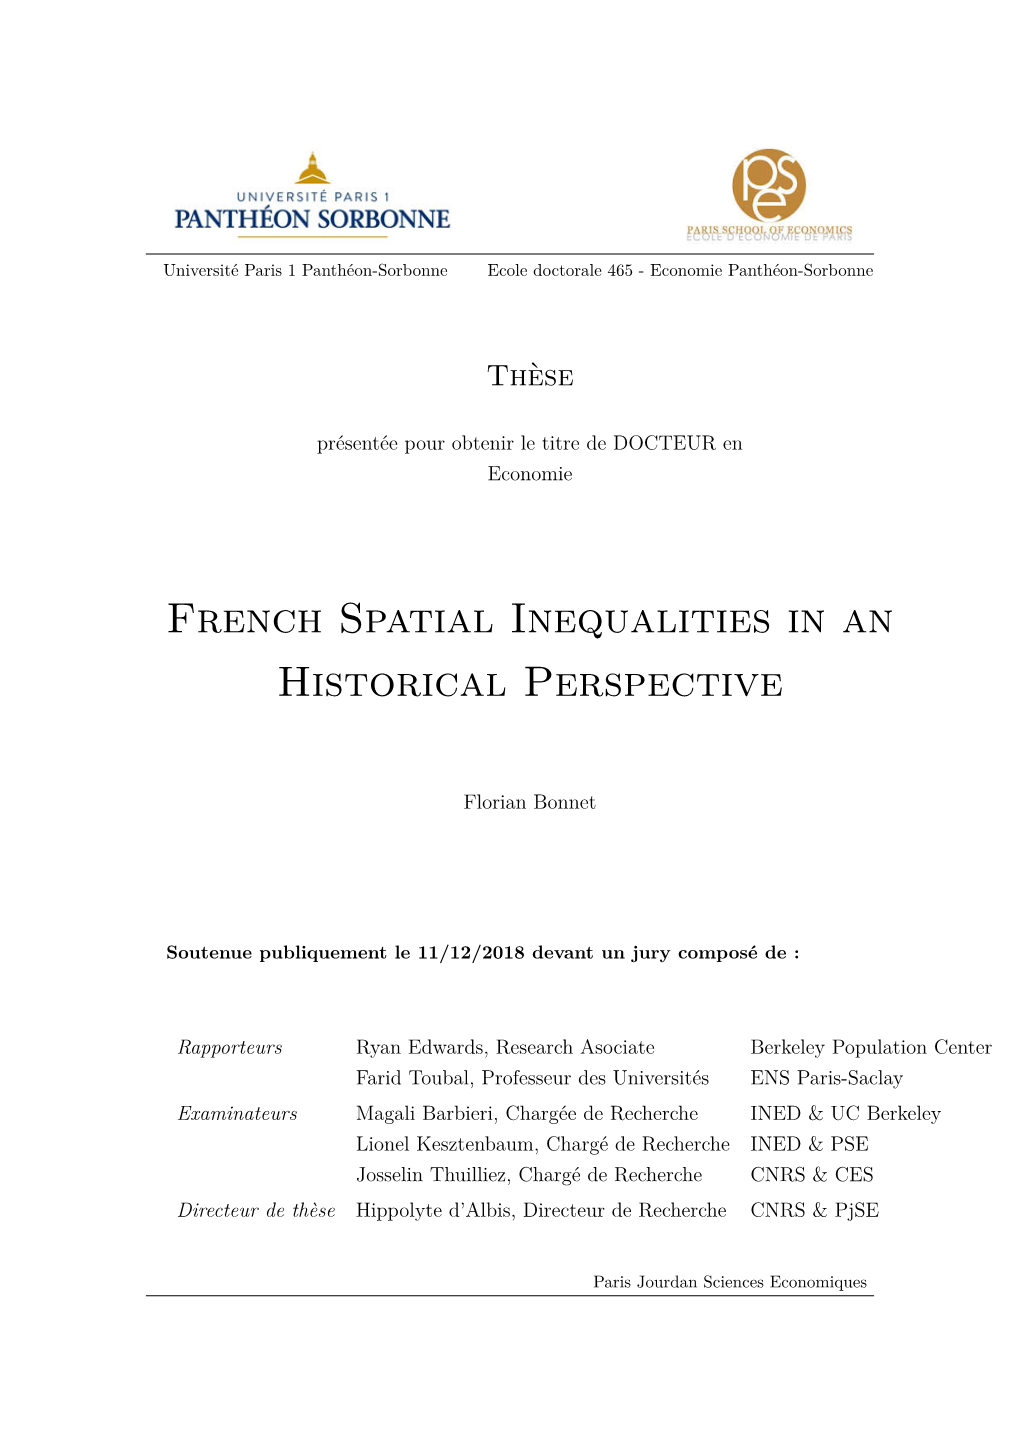 French Spatial Inequalities in an Historical Perspective